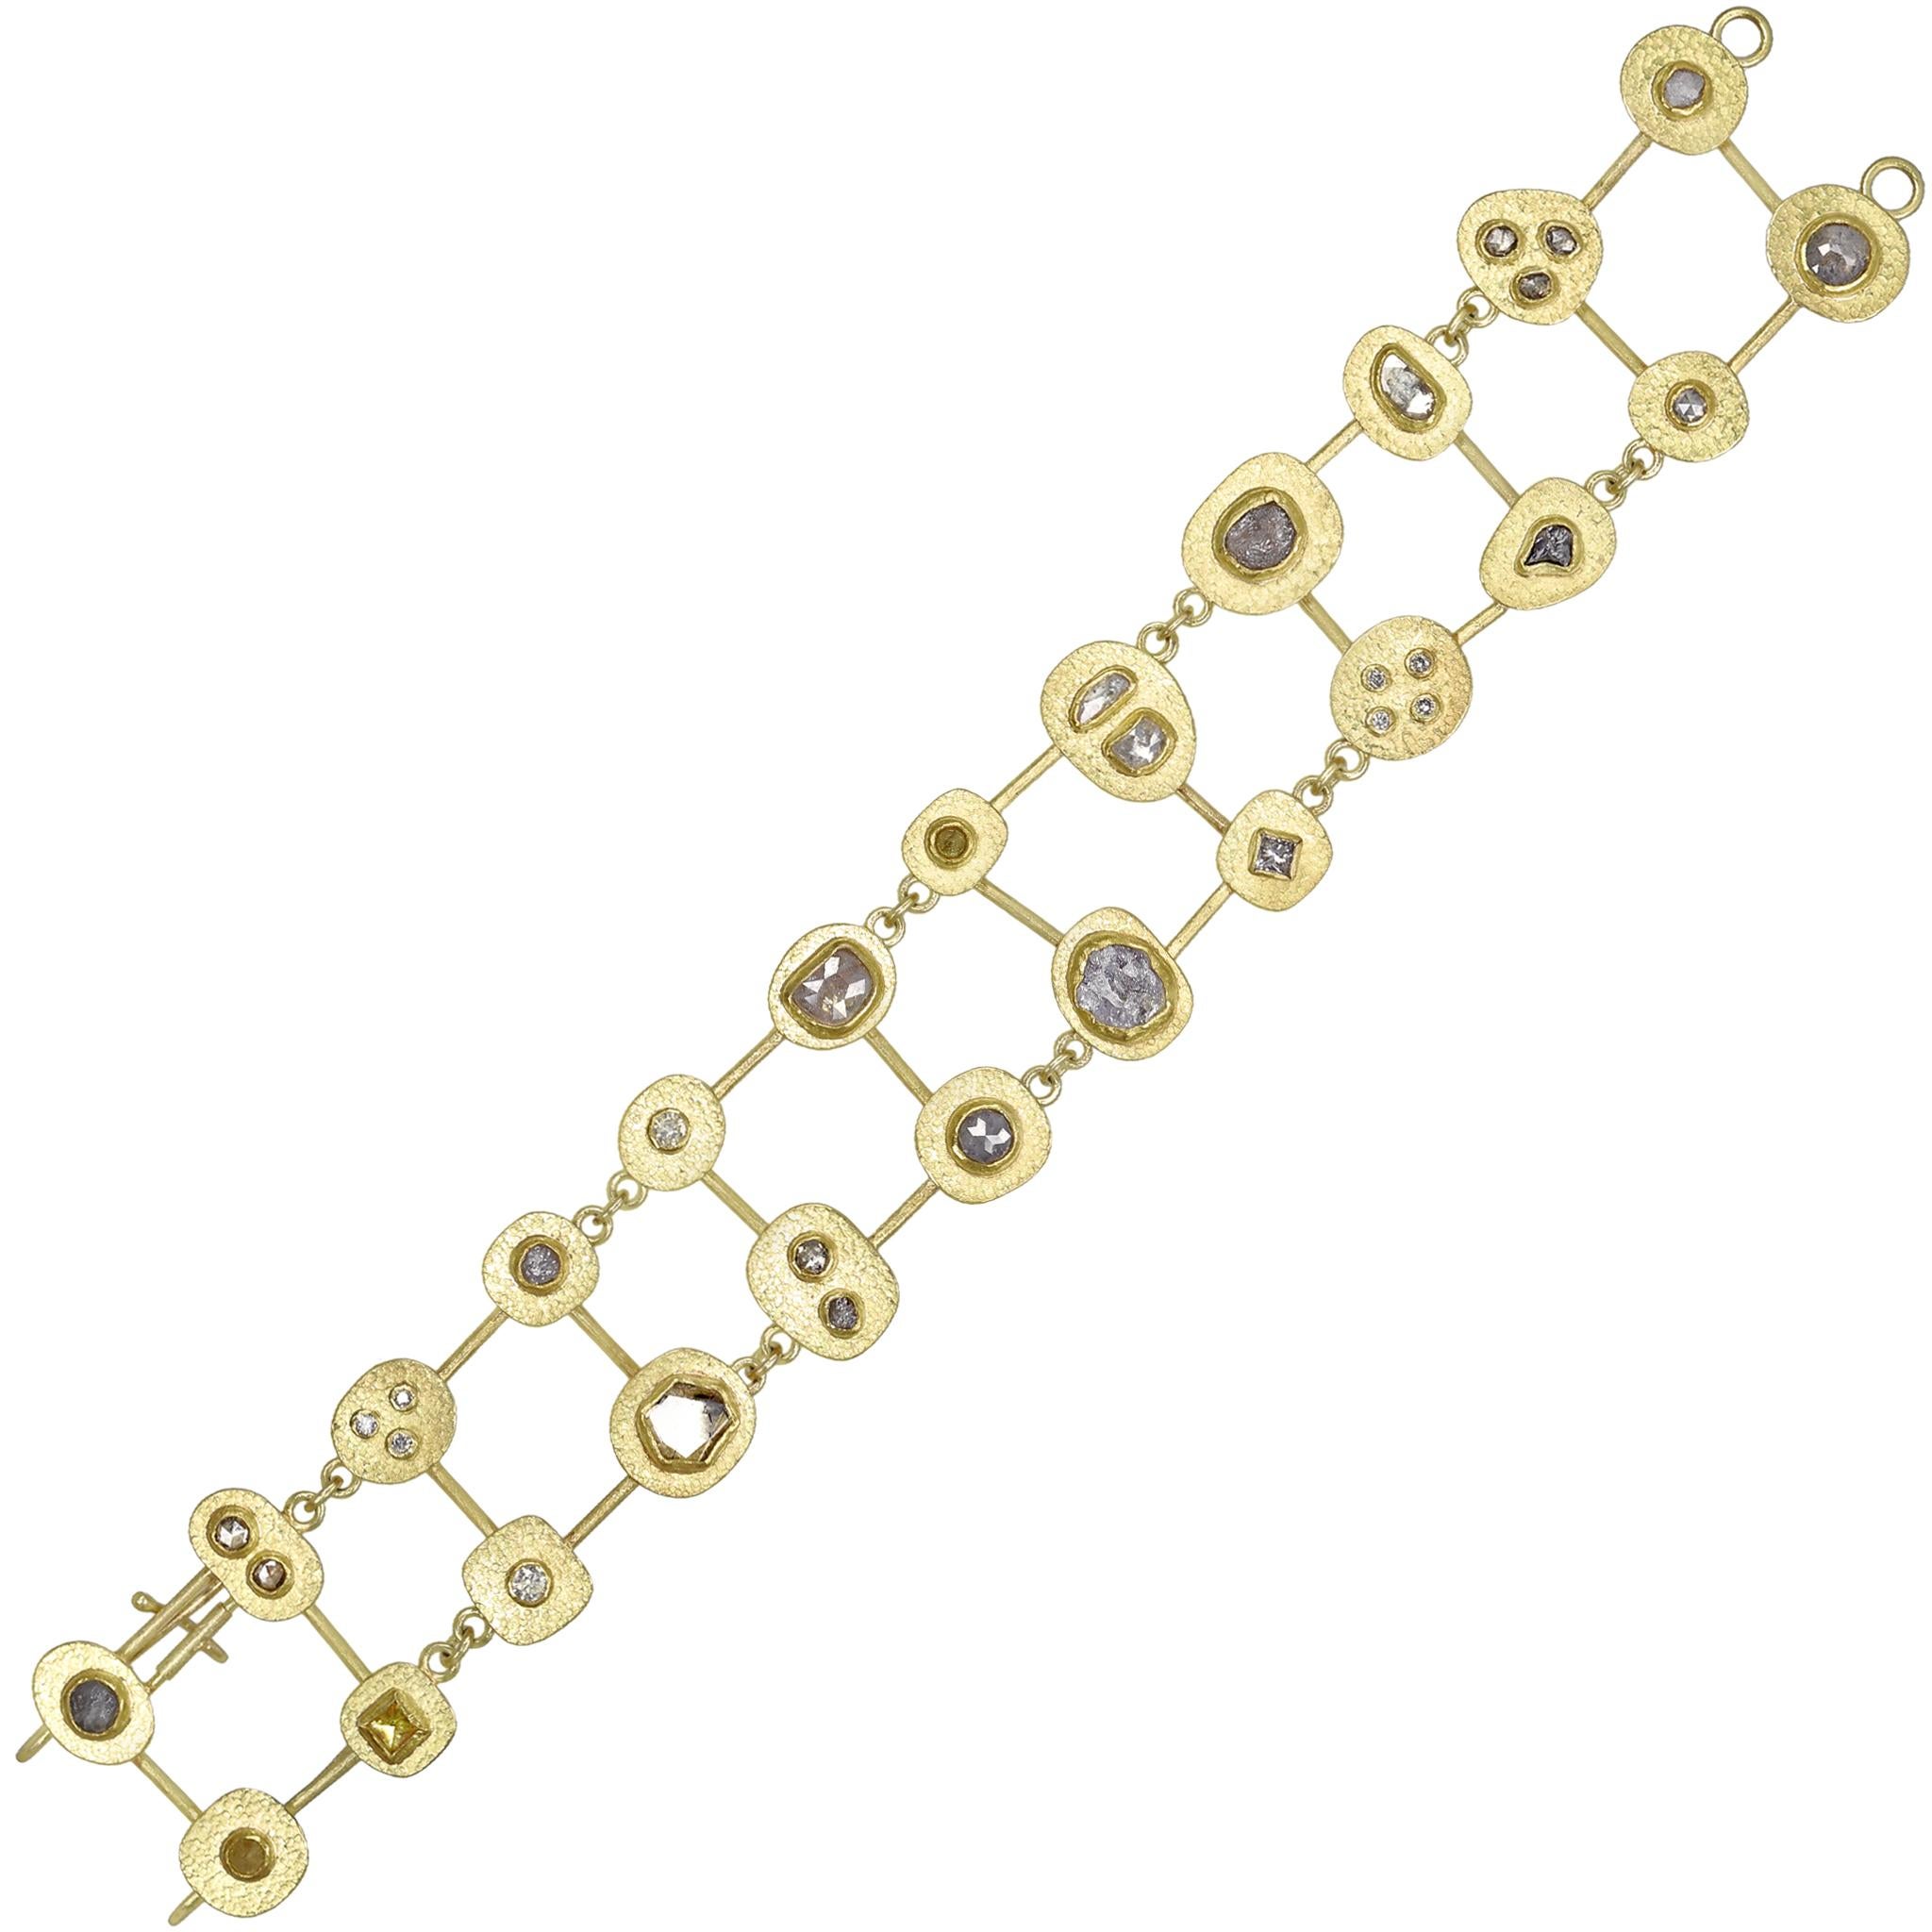 One of a Kind Segments Bracelet intricately hand-fabricated in signature silk-finished 22k yellow gold by acclaimed jewelry artist Petra Class showcasing 6.60 total carats of assorted natural diamonds comprised of round brilliant-cut, princess-cut,